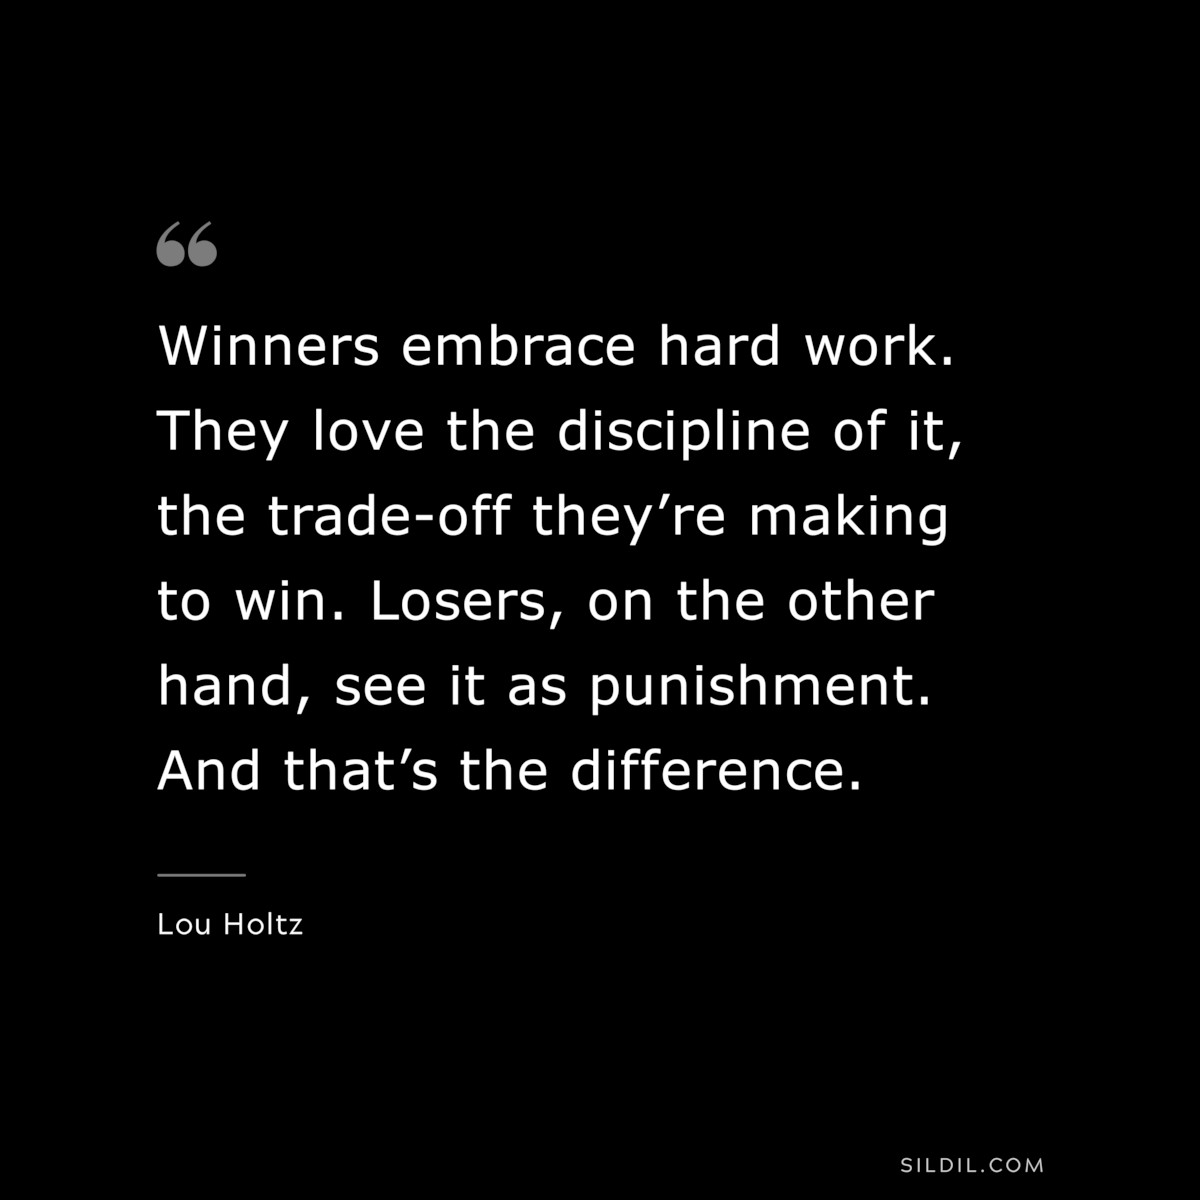 Winners embrace hard work. They love the discipline of it, the trade-off they’re making to win. Losers, on the other hand, see it as punishment. And that’s the difference. ― Lou Holtz